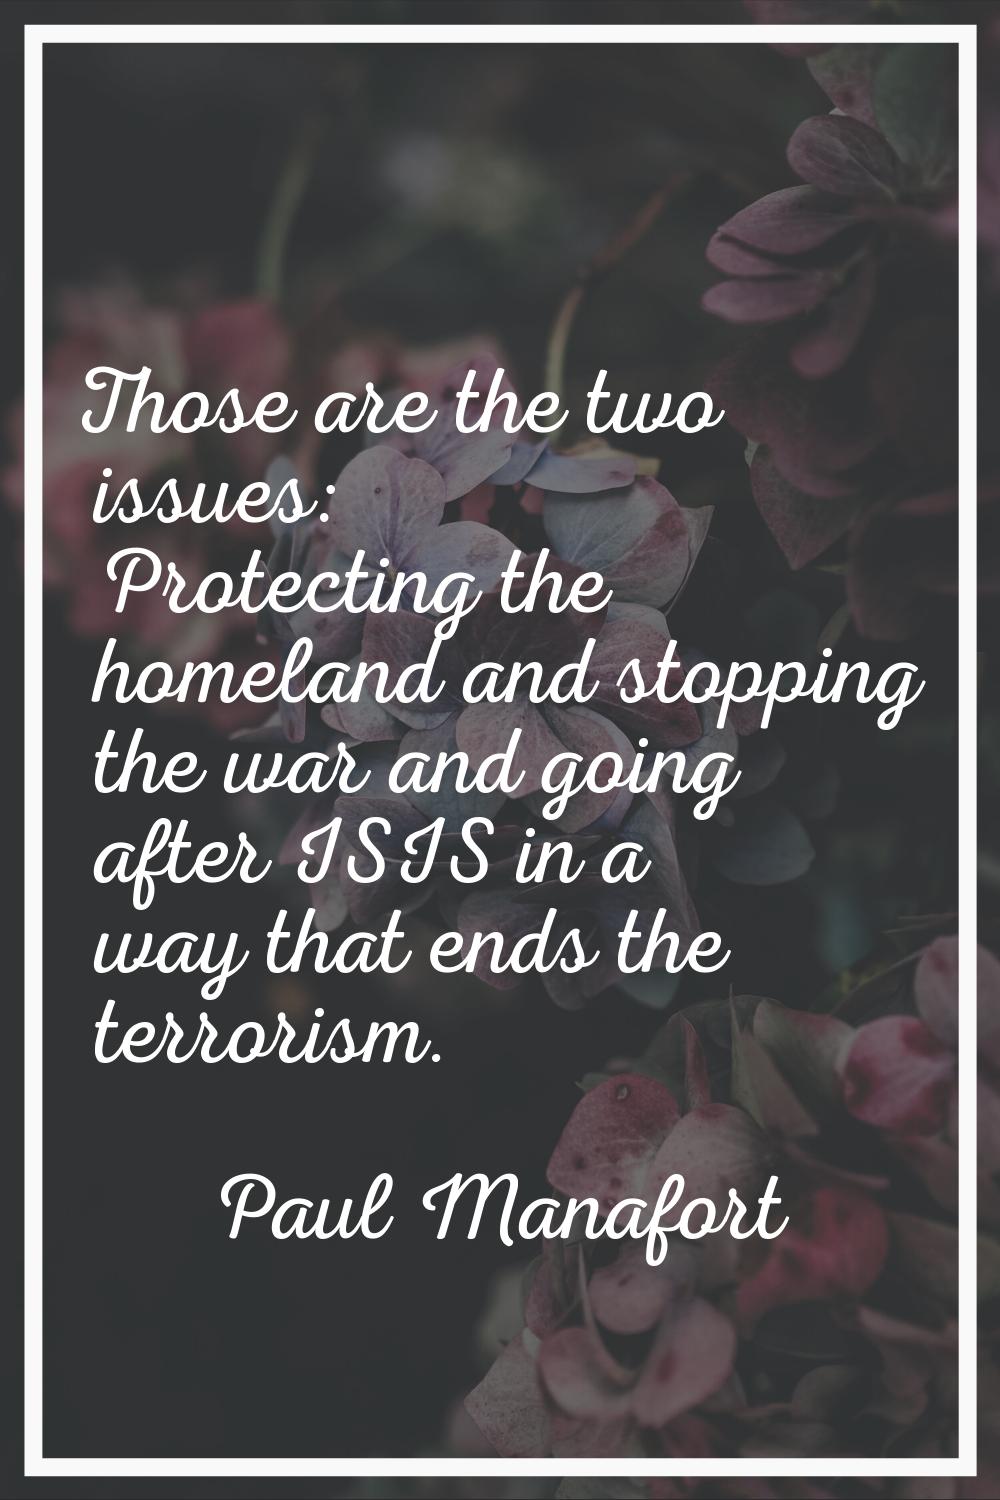 Those are the two issues: Protecting the homeland and stopping the war and going after ISIS in a wa